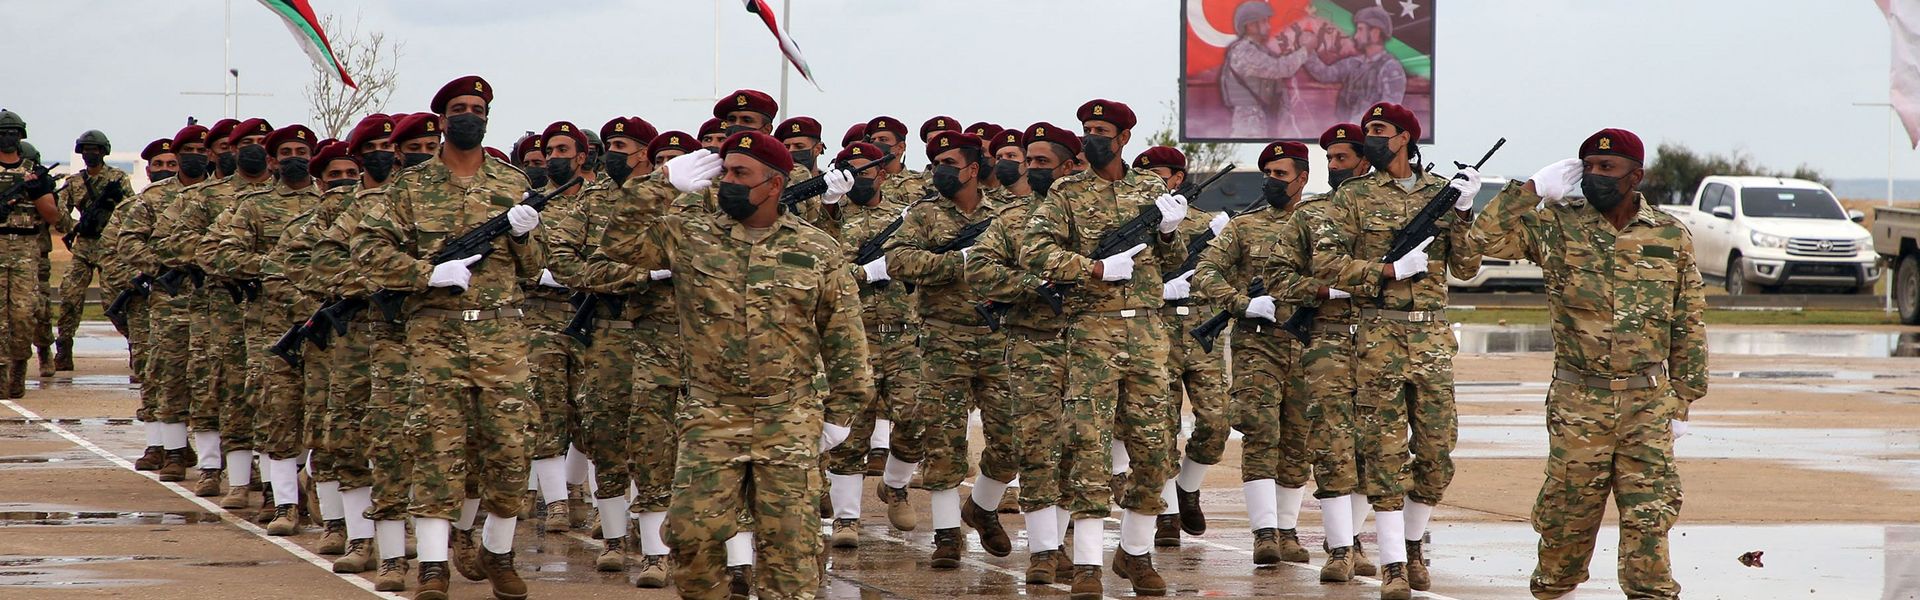 The special military forces of Libya trained by Turkey on graduation day in November 2020.